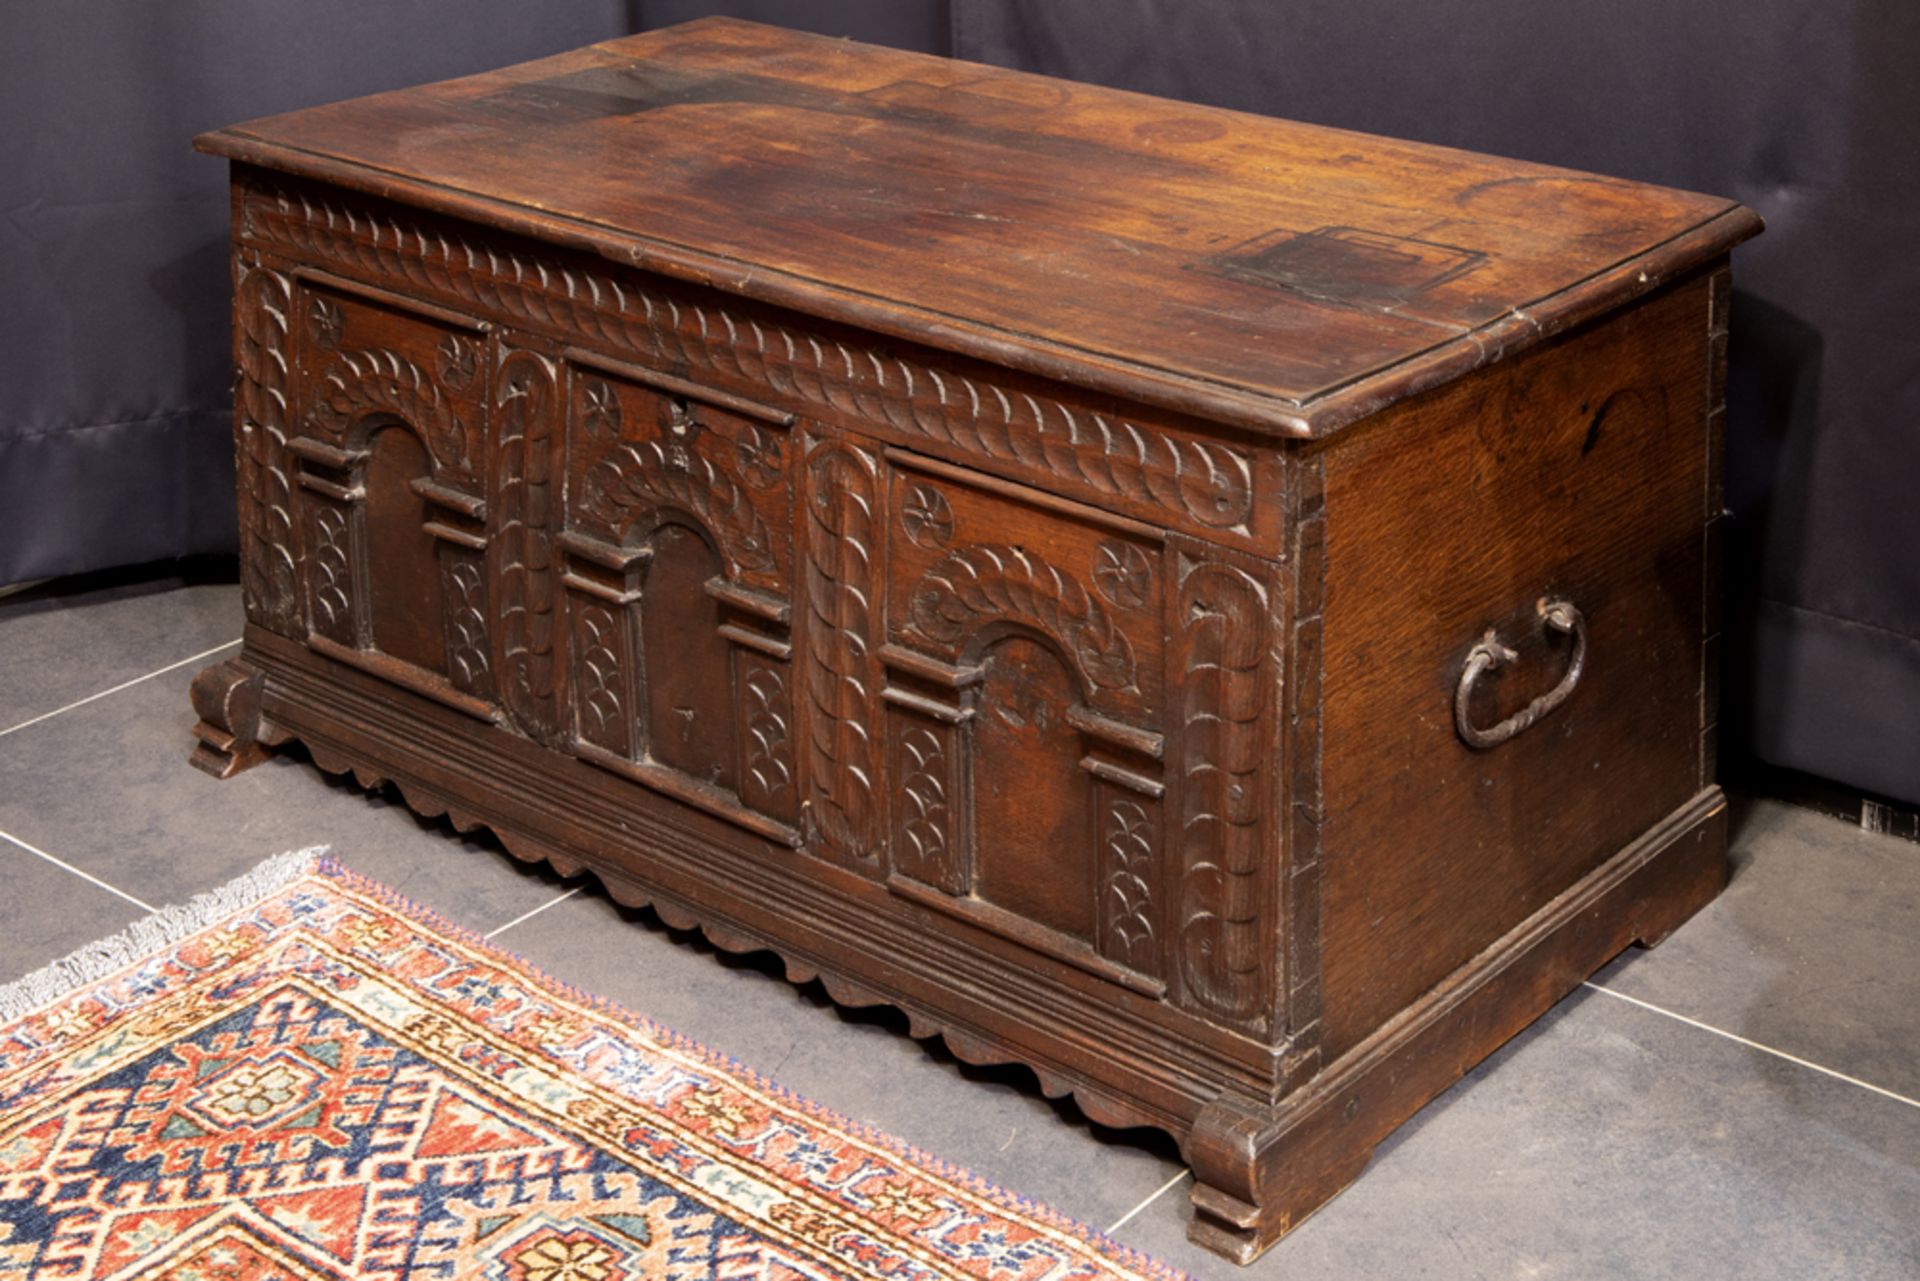 good antique chest in oak with baroque style sculpted panels || Goede antieke koffer in eik met